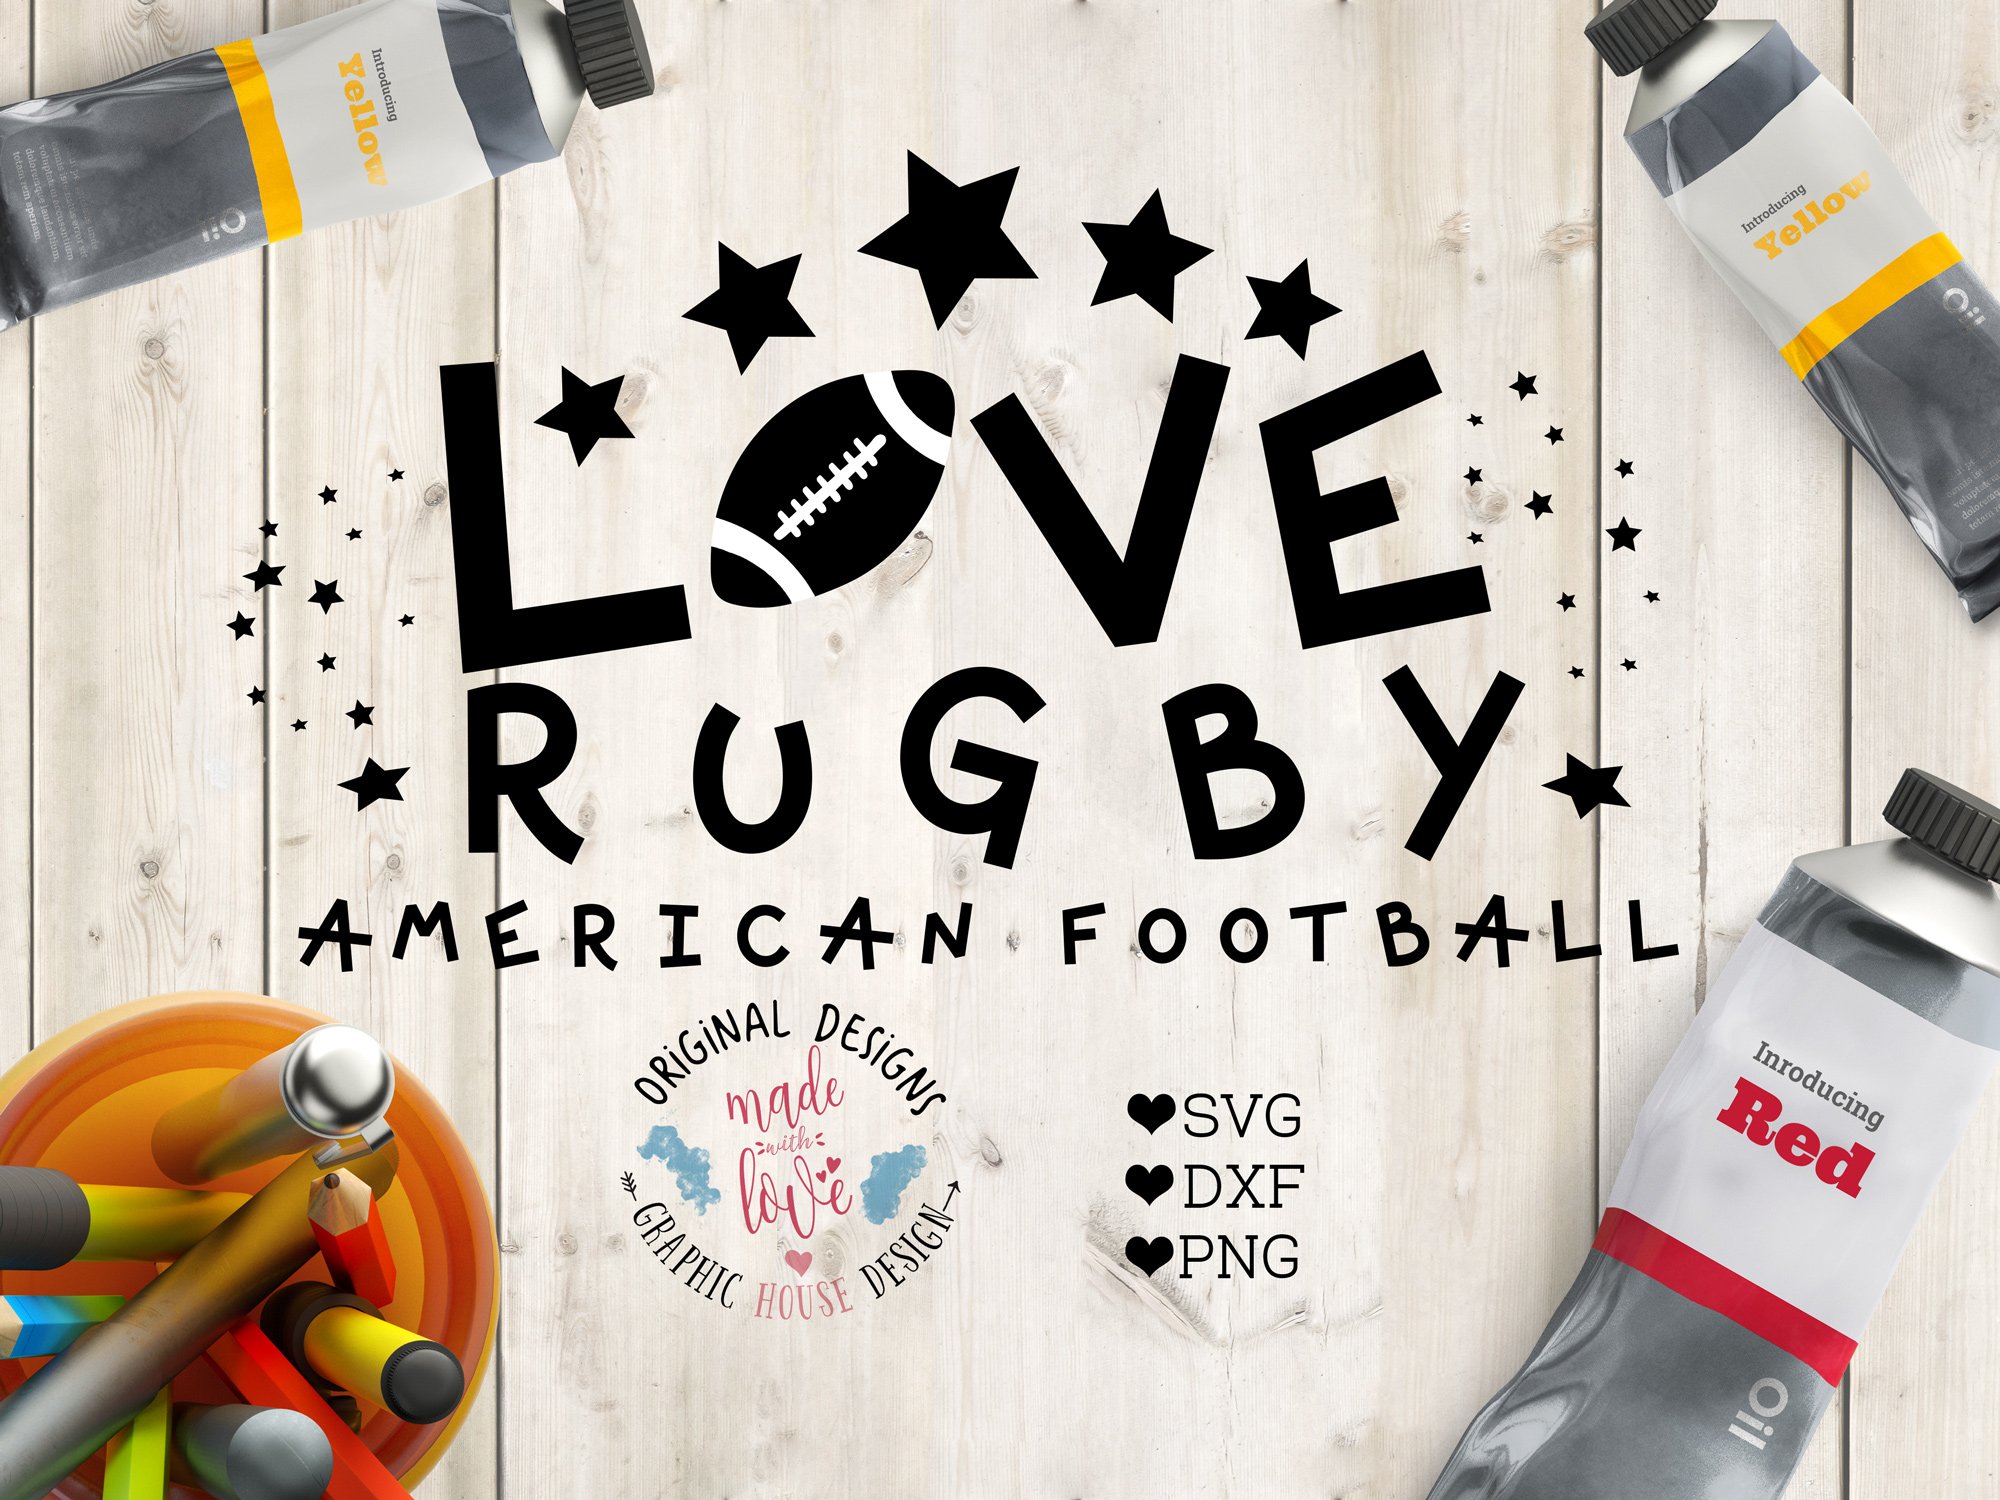 Love Rugby American Football SVG cover image.